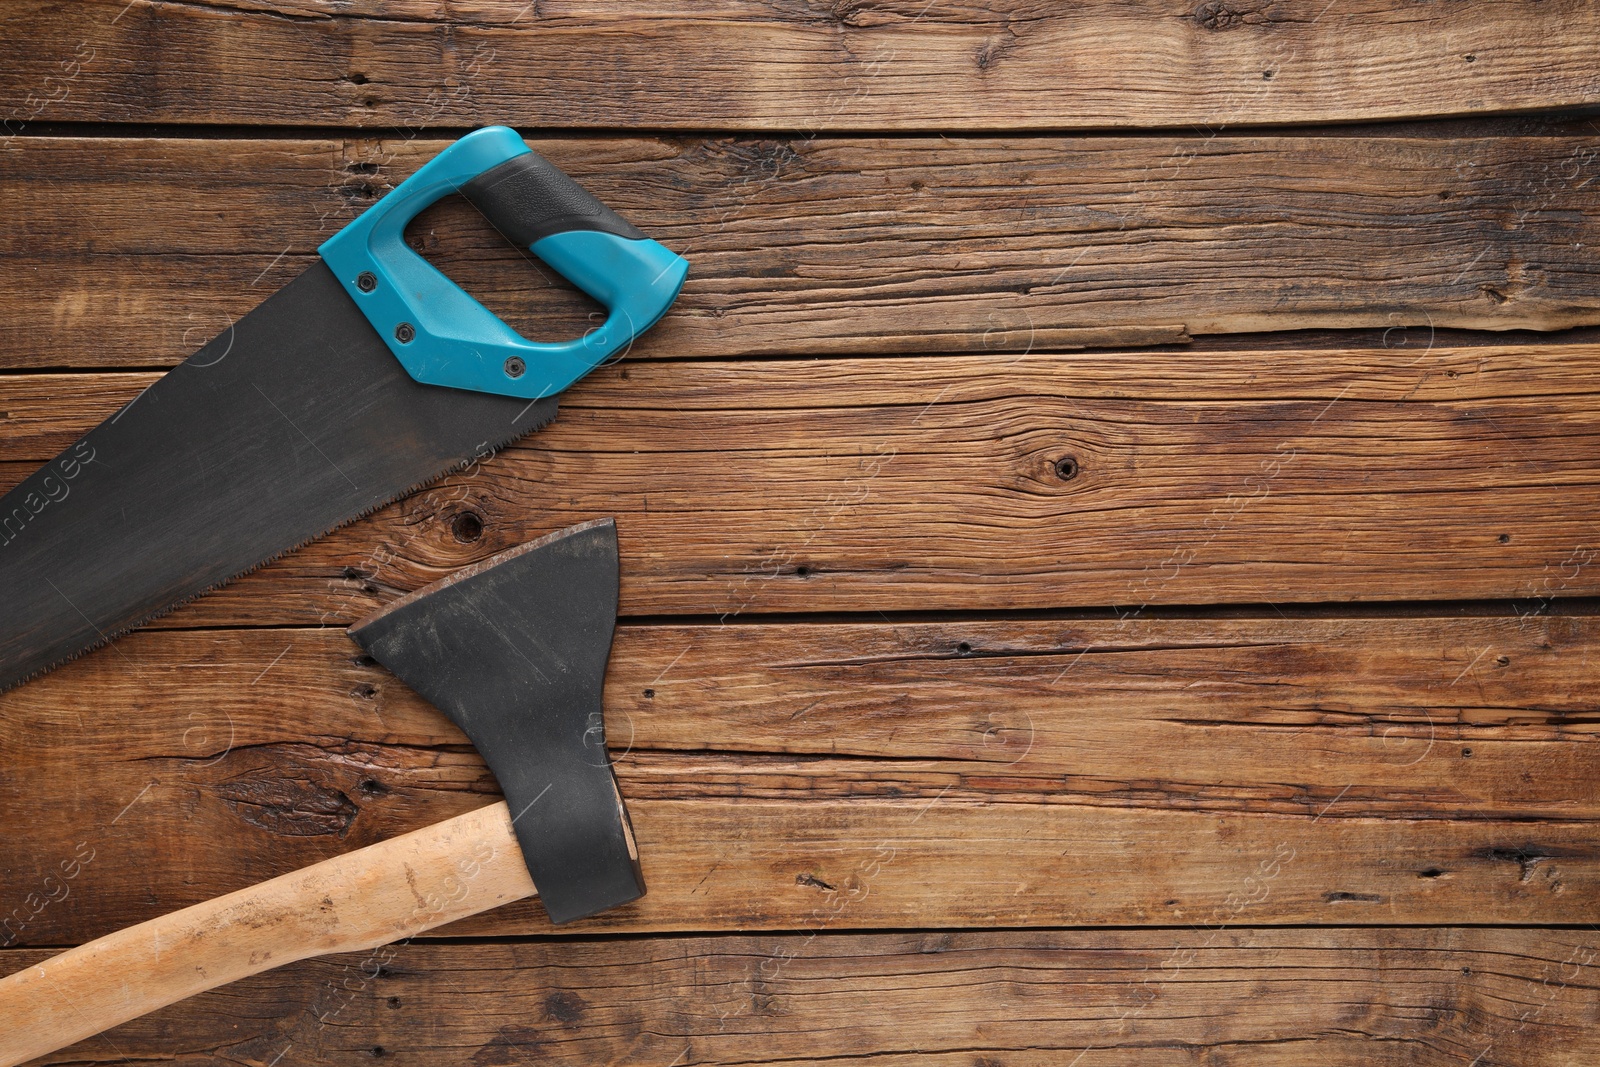 Photo of Saw with light blue handle and axe on wooden background, flat lay. Space for text